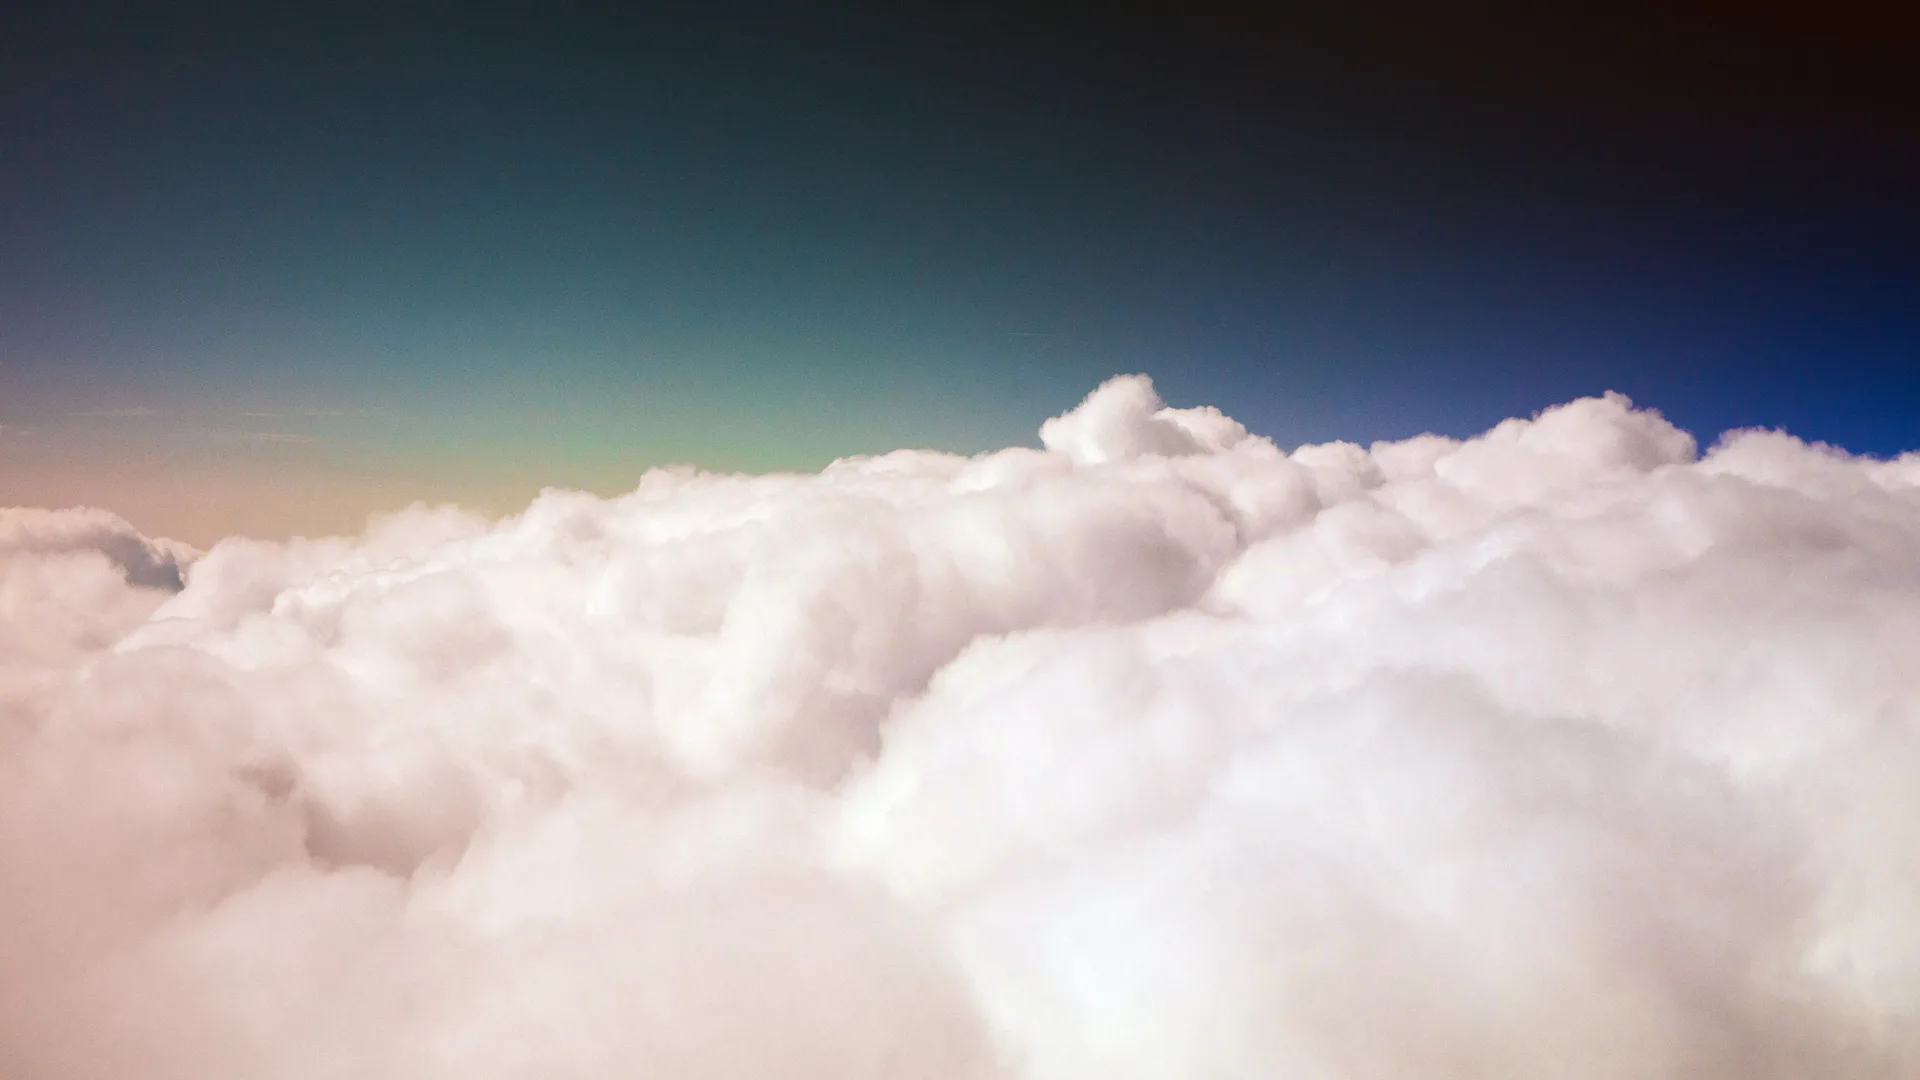 A photograph of fluffy white clouds against a blue sky